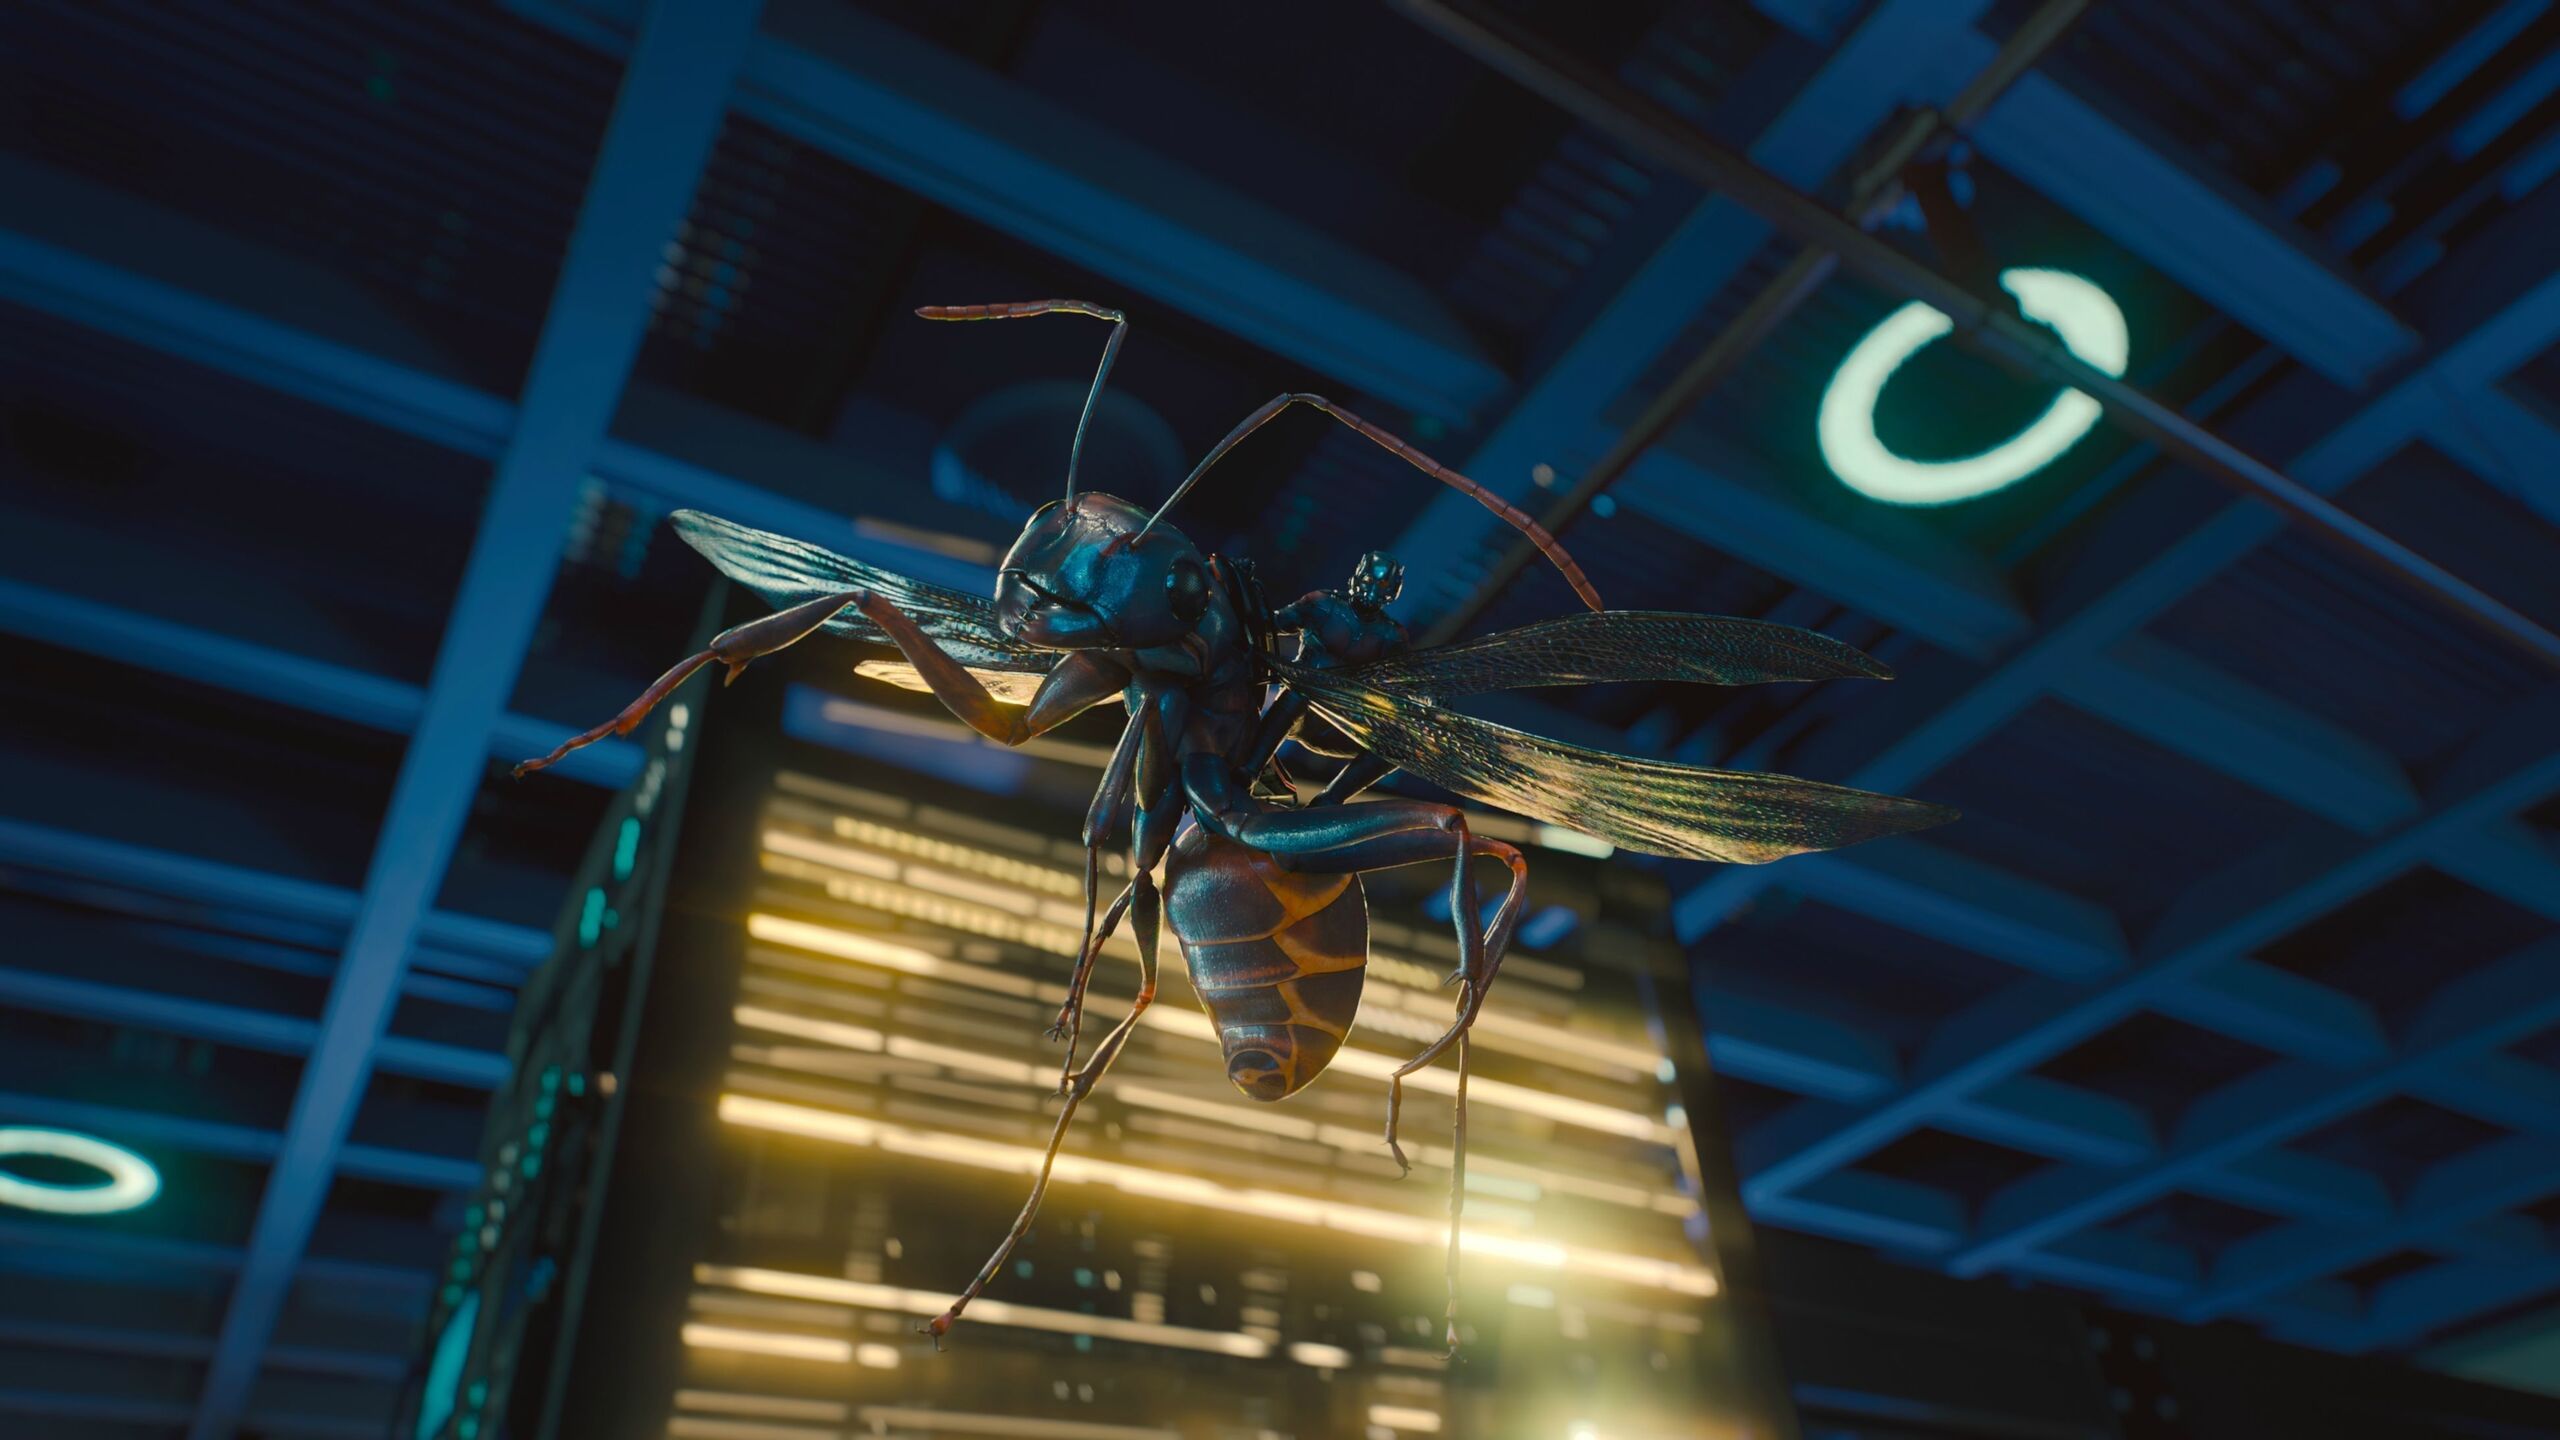 2018-ant-man-and-the-wasp-movie-4k-9t.jpg